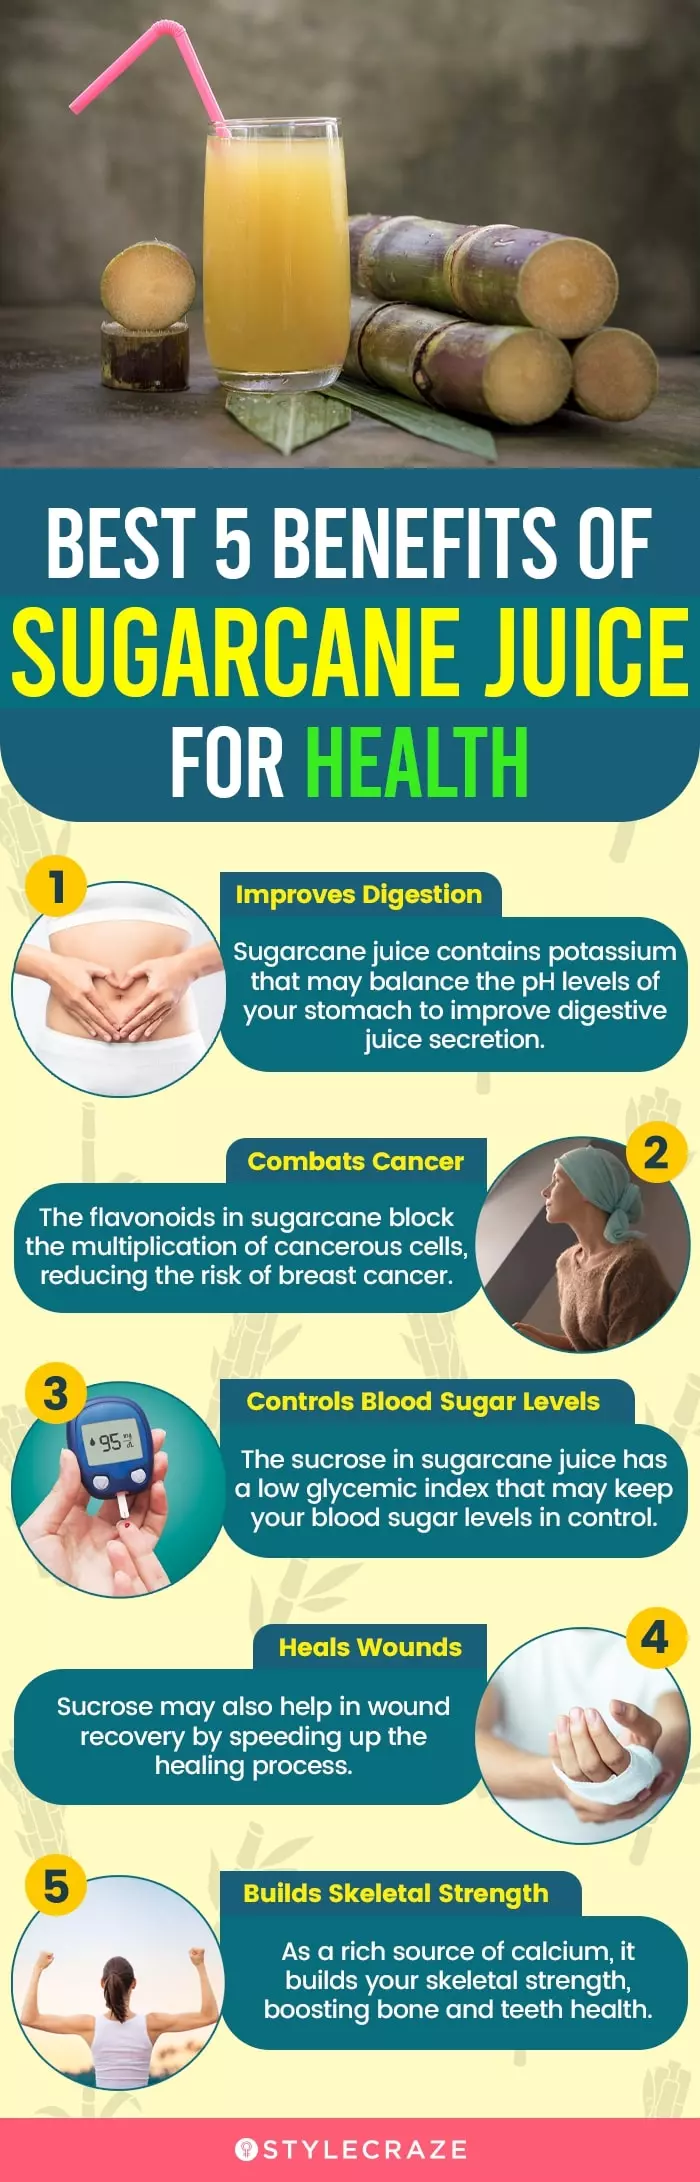 best 5 benefits of sugarcane juice for health (infographic)